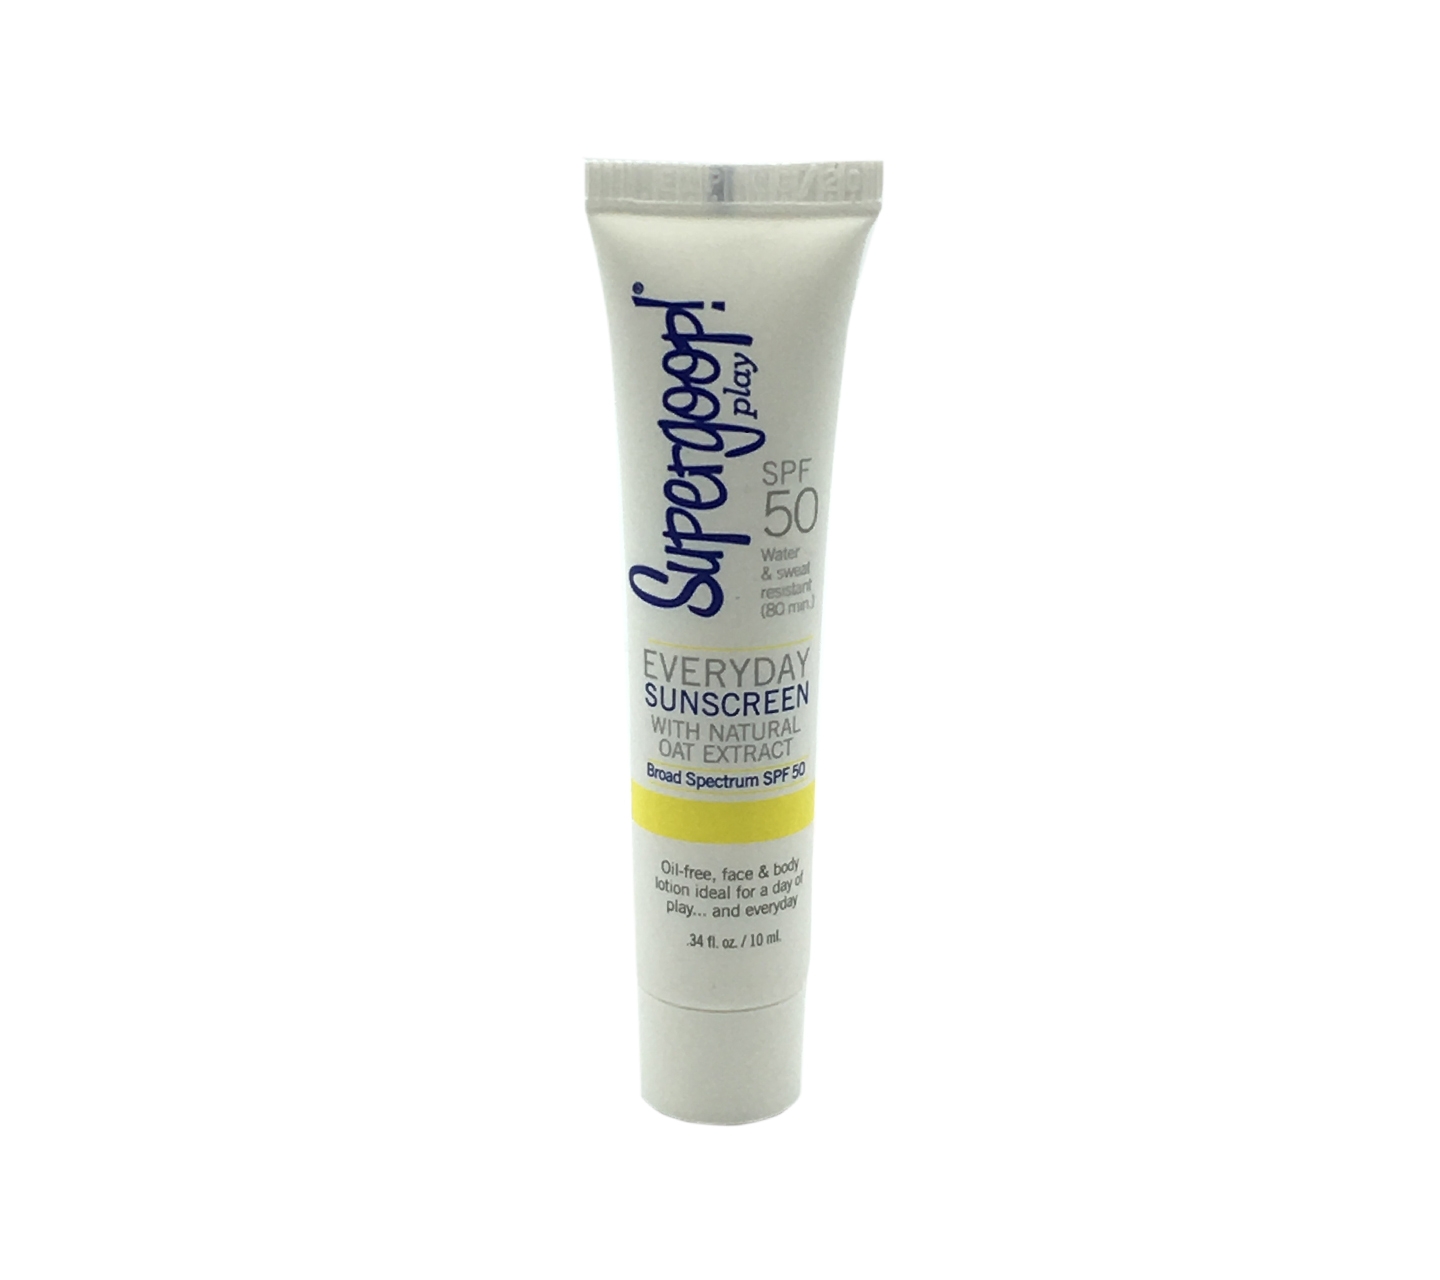 Supergroop! Everyday Suncreen SPF 50 Faces